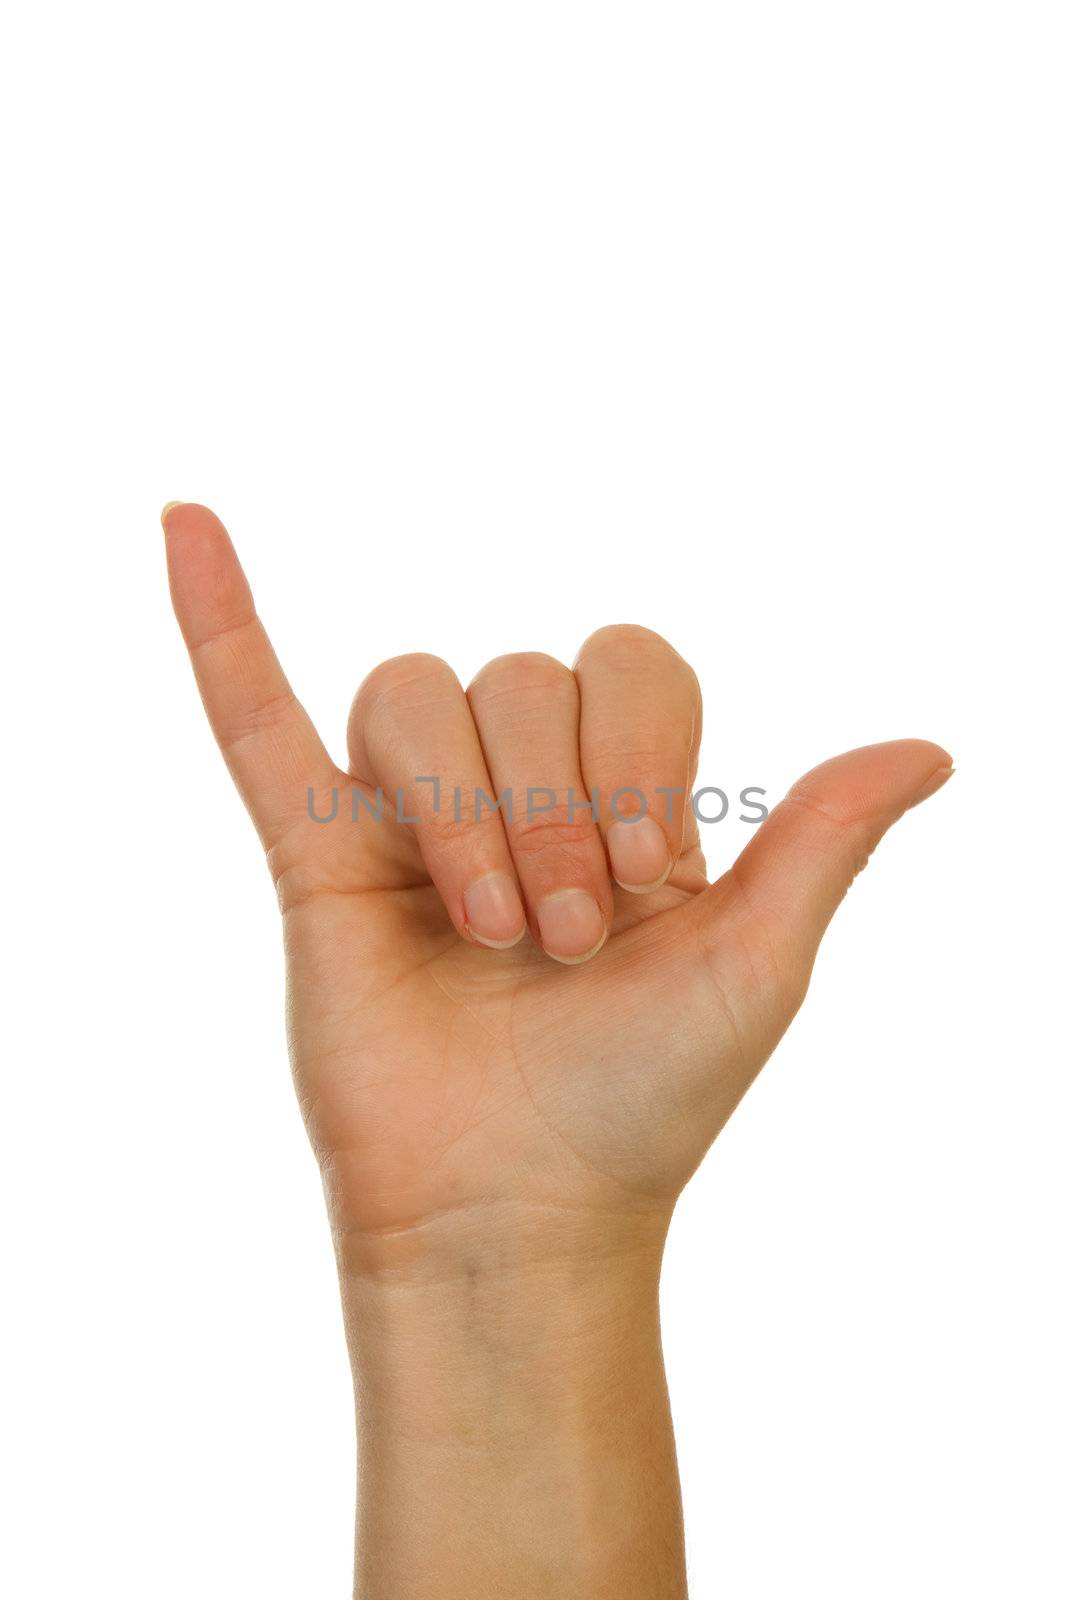 Finger spelling, hand alphabets, letter Y by sannie32